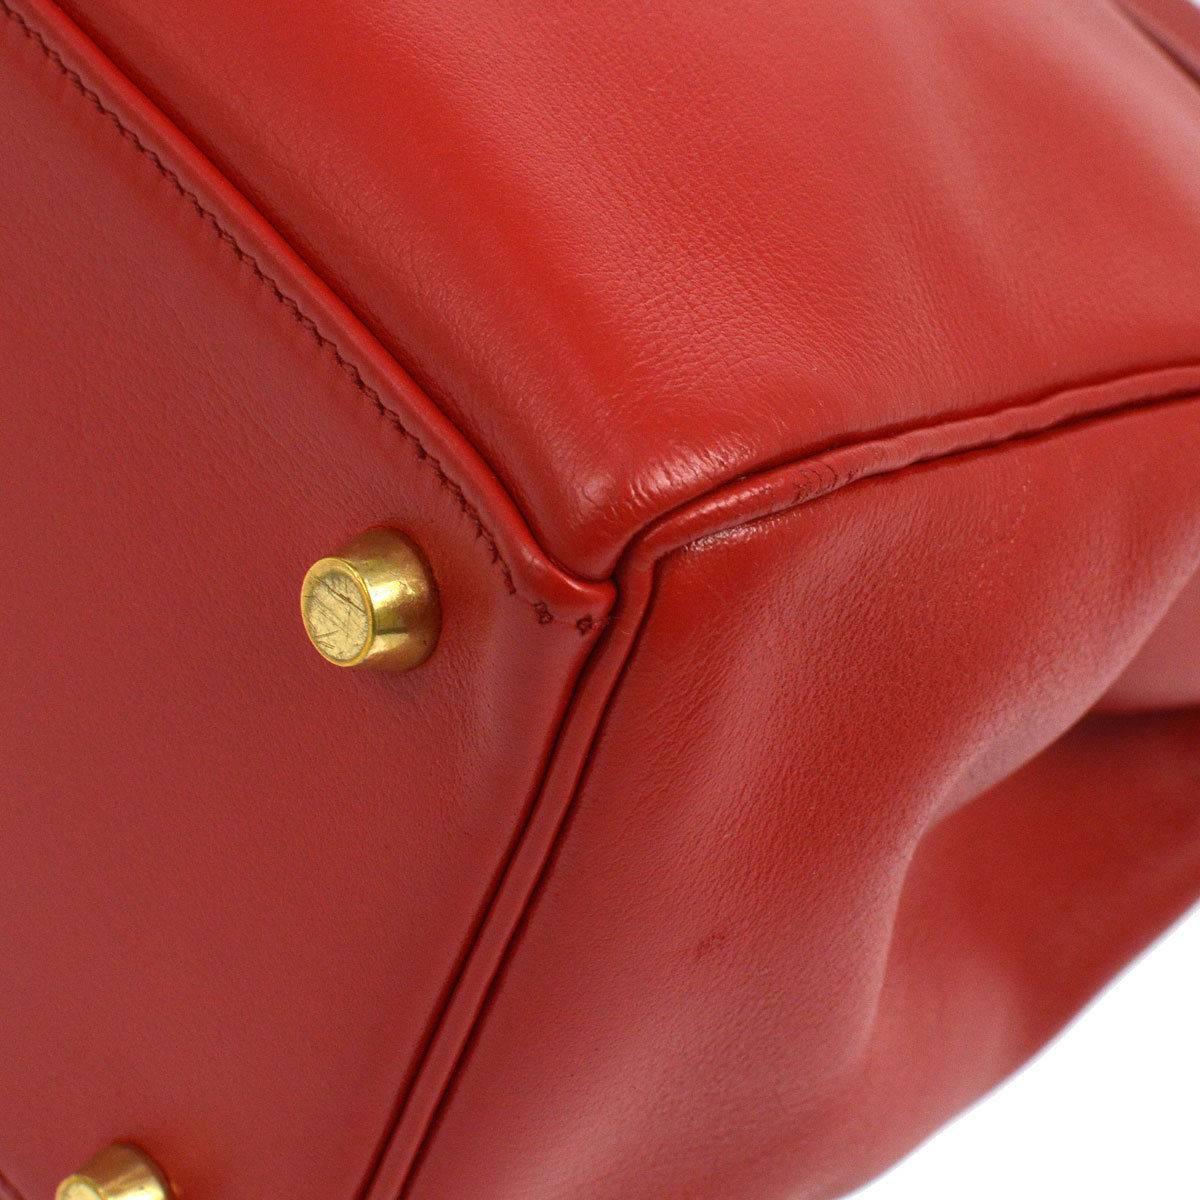 Hermes Kelly 32 Rouge Red Leather Evening Top Handle Satchel Flap Bag in Box 2